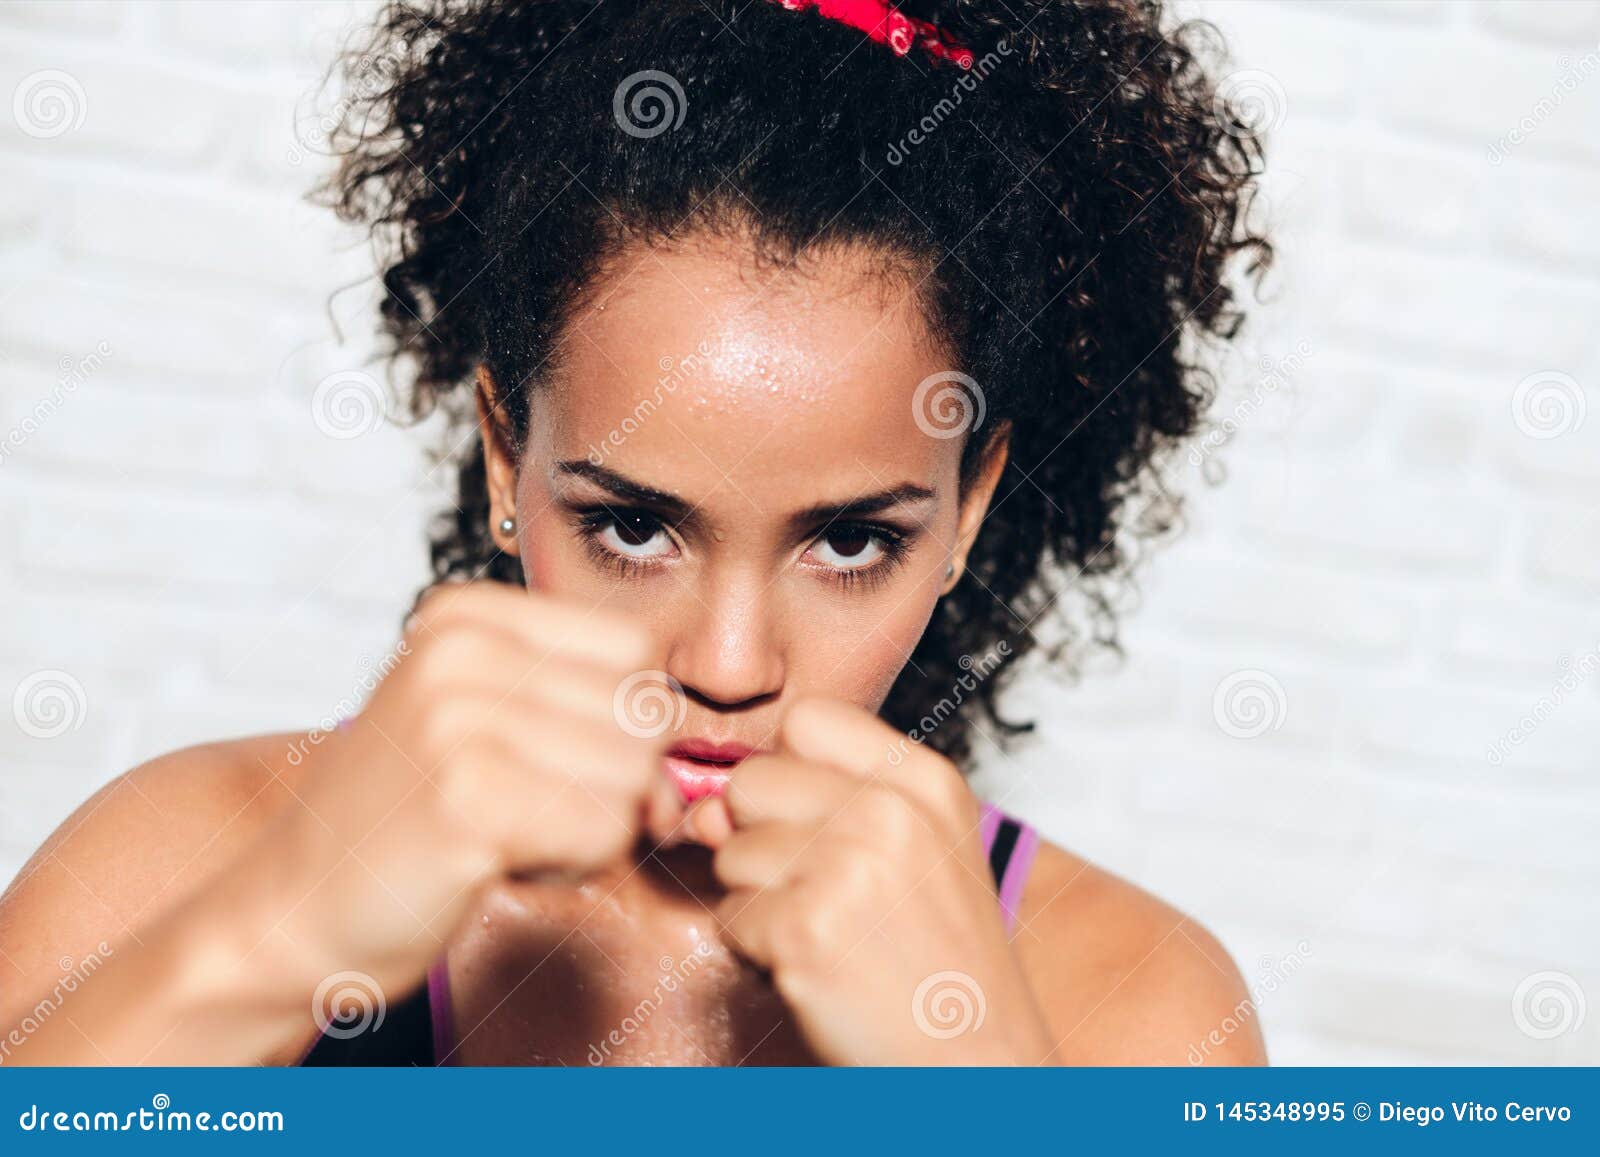 strong african american girl black woman fighting for self defense